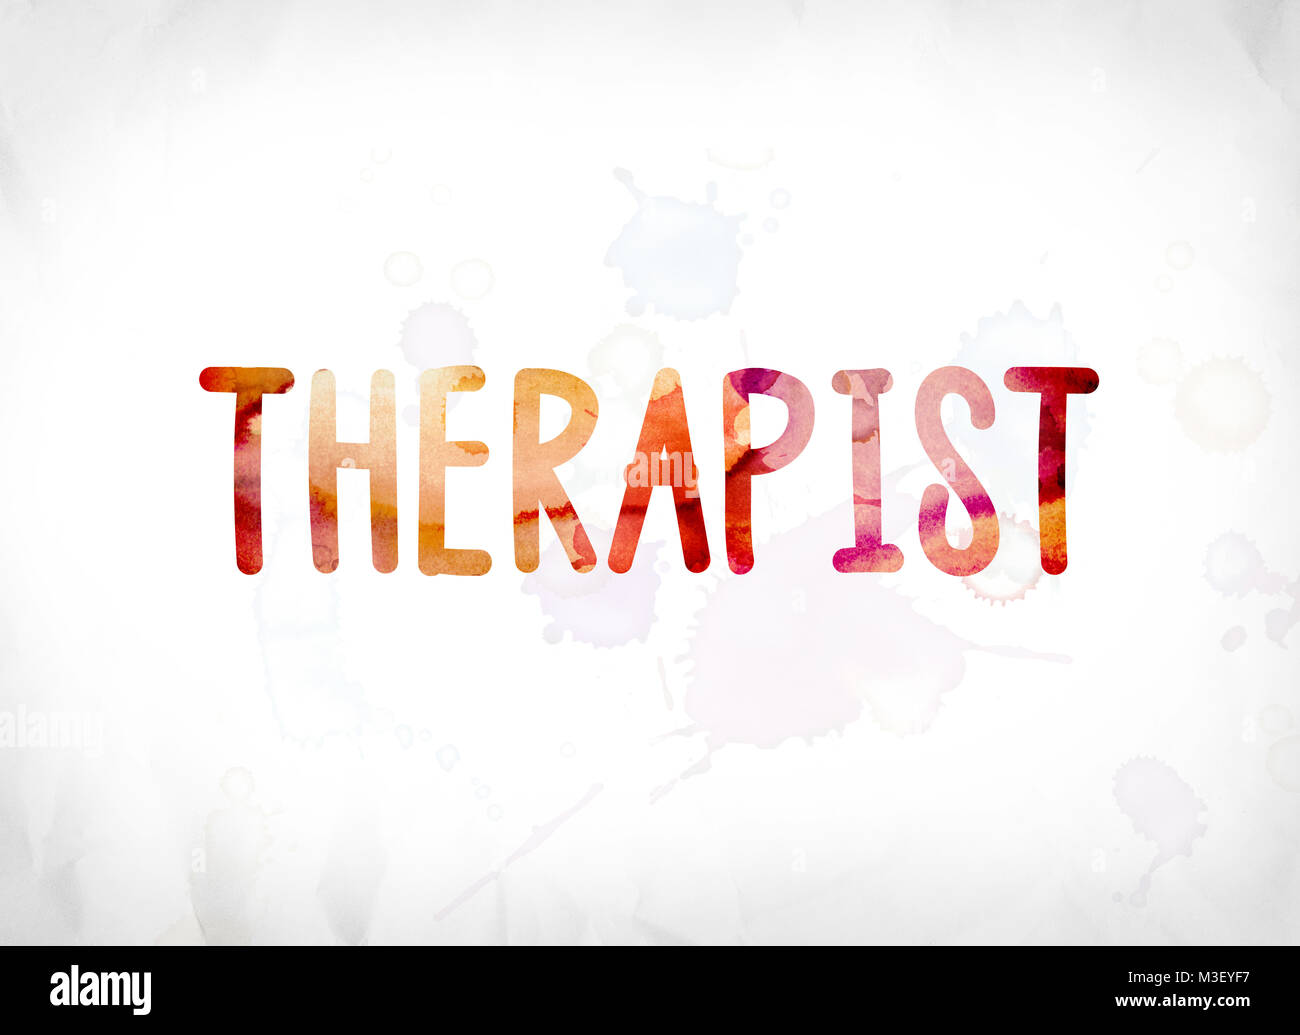 The word Therapist concept and theme painted in colorful watercolors on a white paper background. Stock Photo